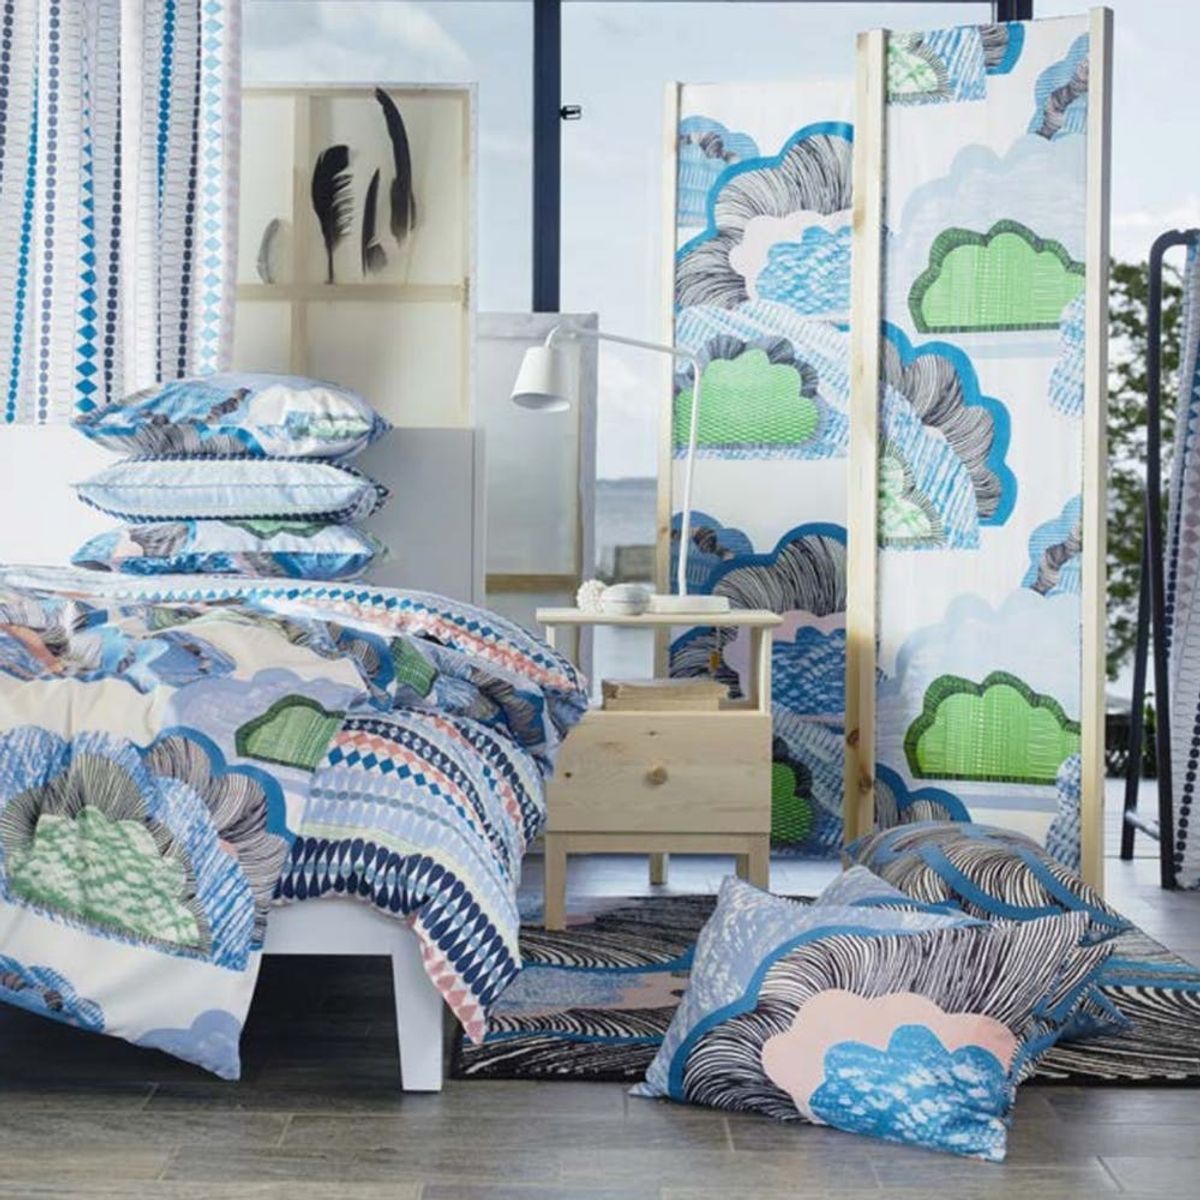 11 Items in IKEA’s New Fall Line You Need Now